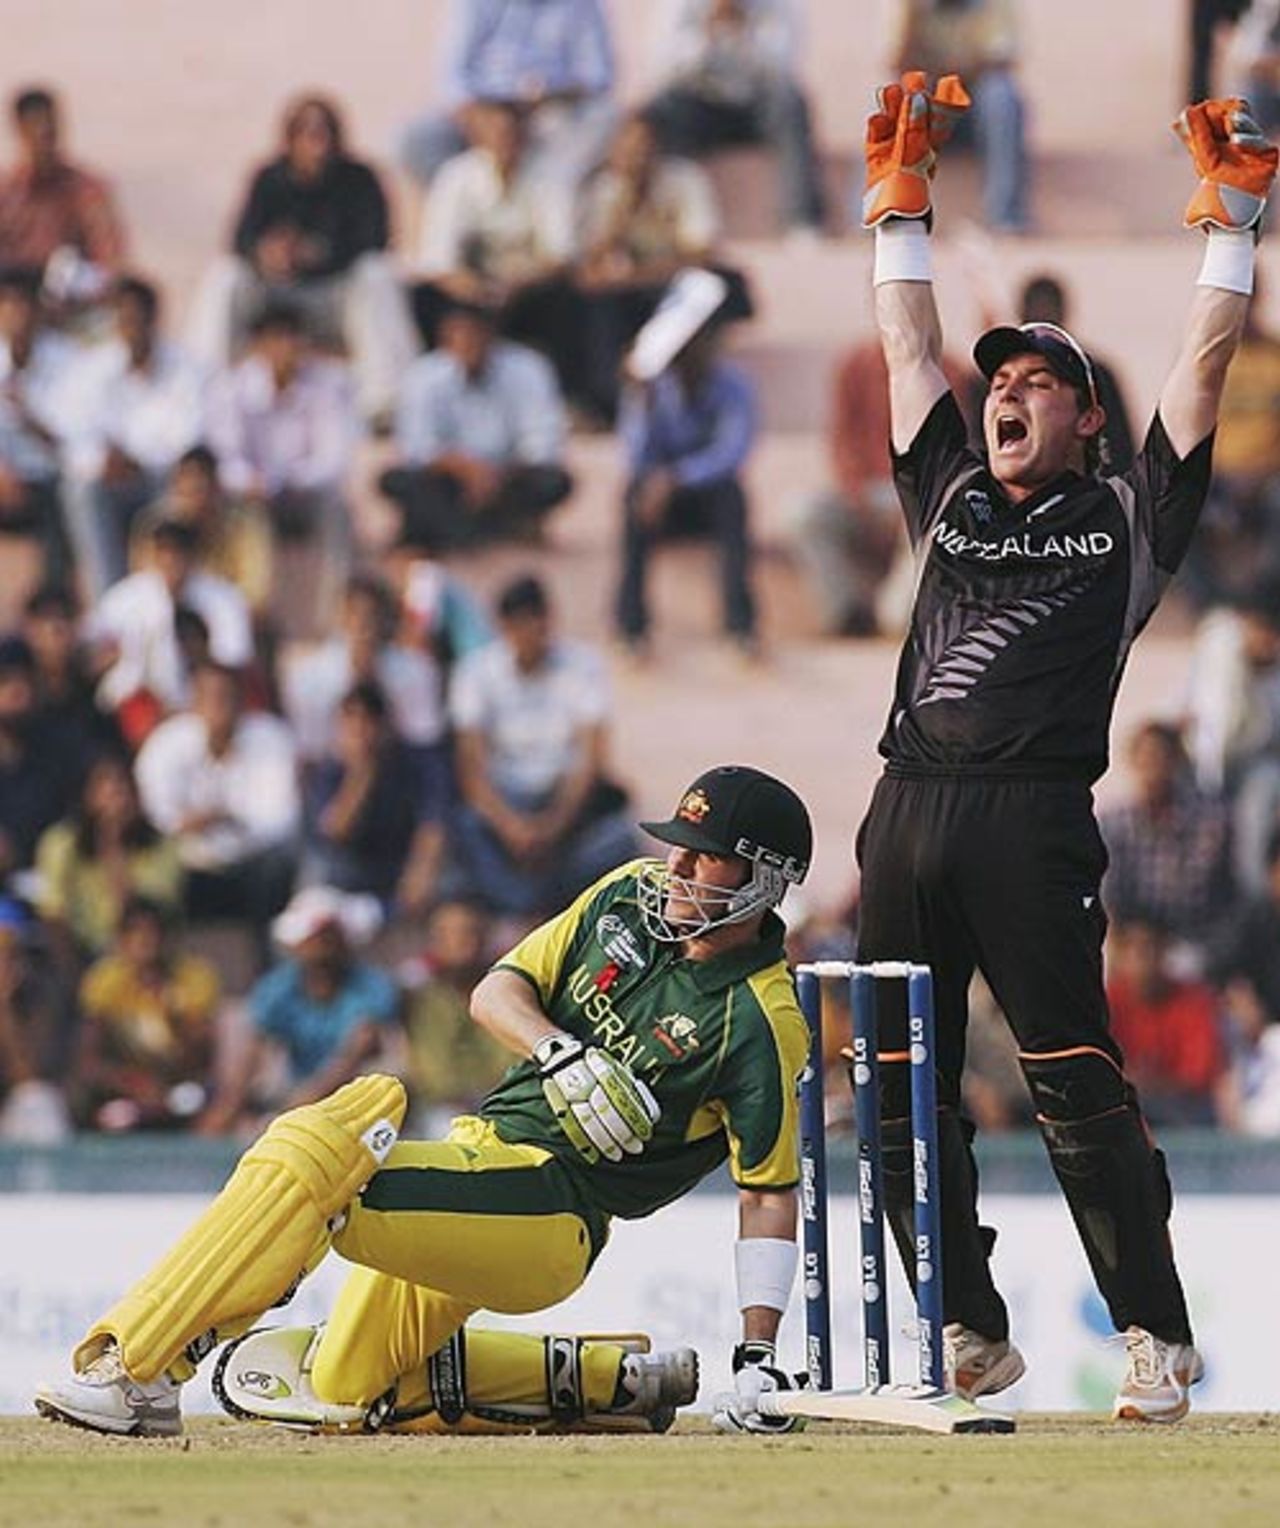 Brendon McCullum appeals successfully as Damien Martyn is trapped in front, Australia v New Zealand, 1st semi-final, Champions Trophy, Mohali, November 1, 2006 